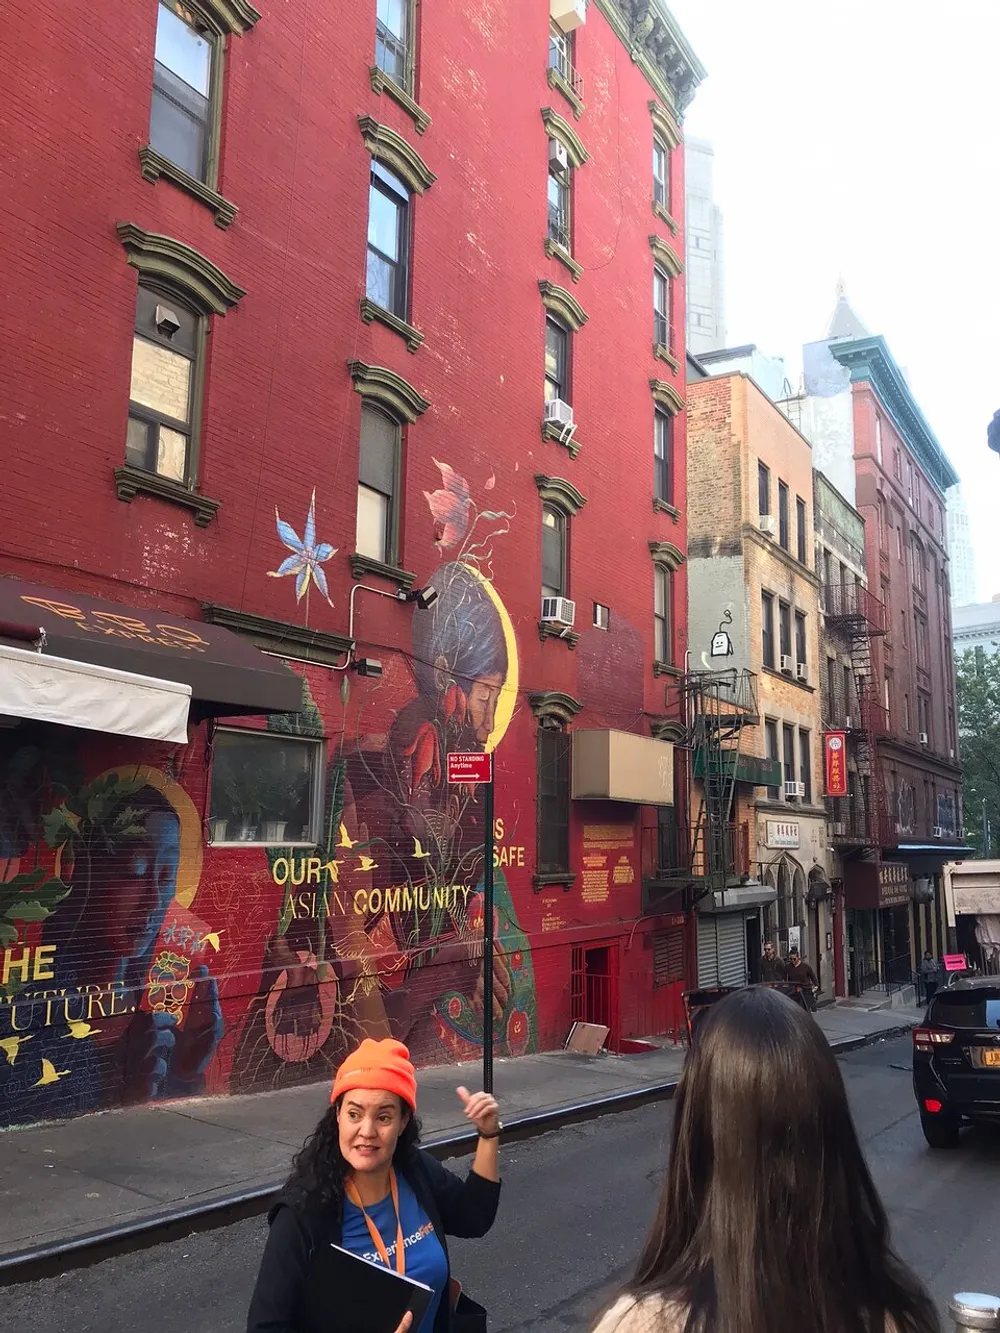 The image shows a vibrant street mural with the message Our Asian Community is Safe on a red building with a tour guide in an orange hat gesturing towards the artwork while speaking to her audience